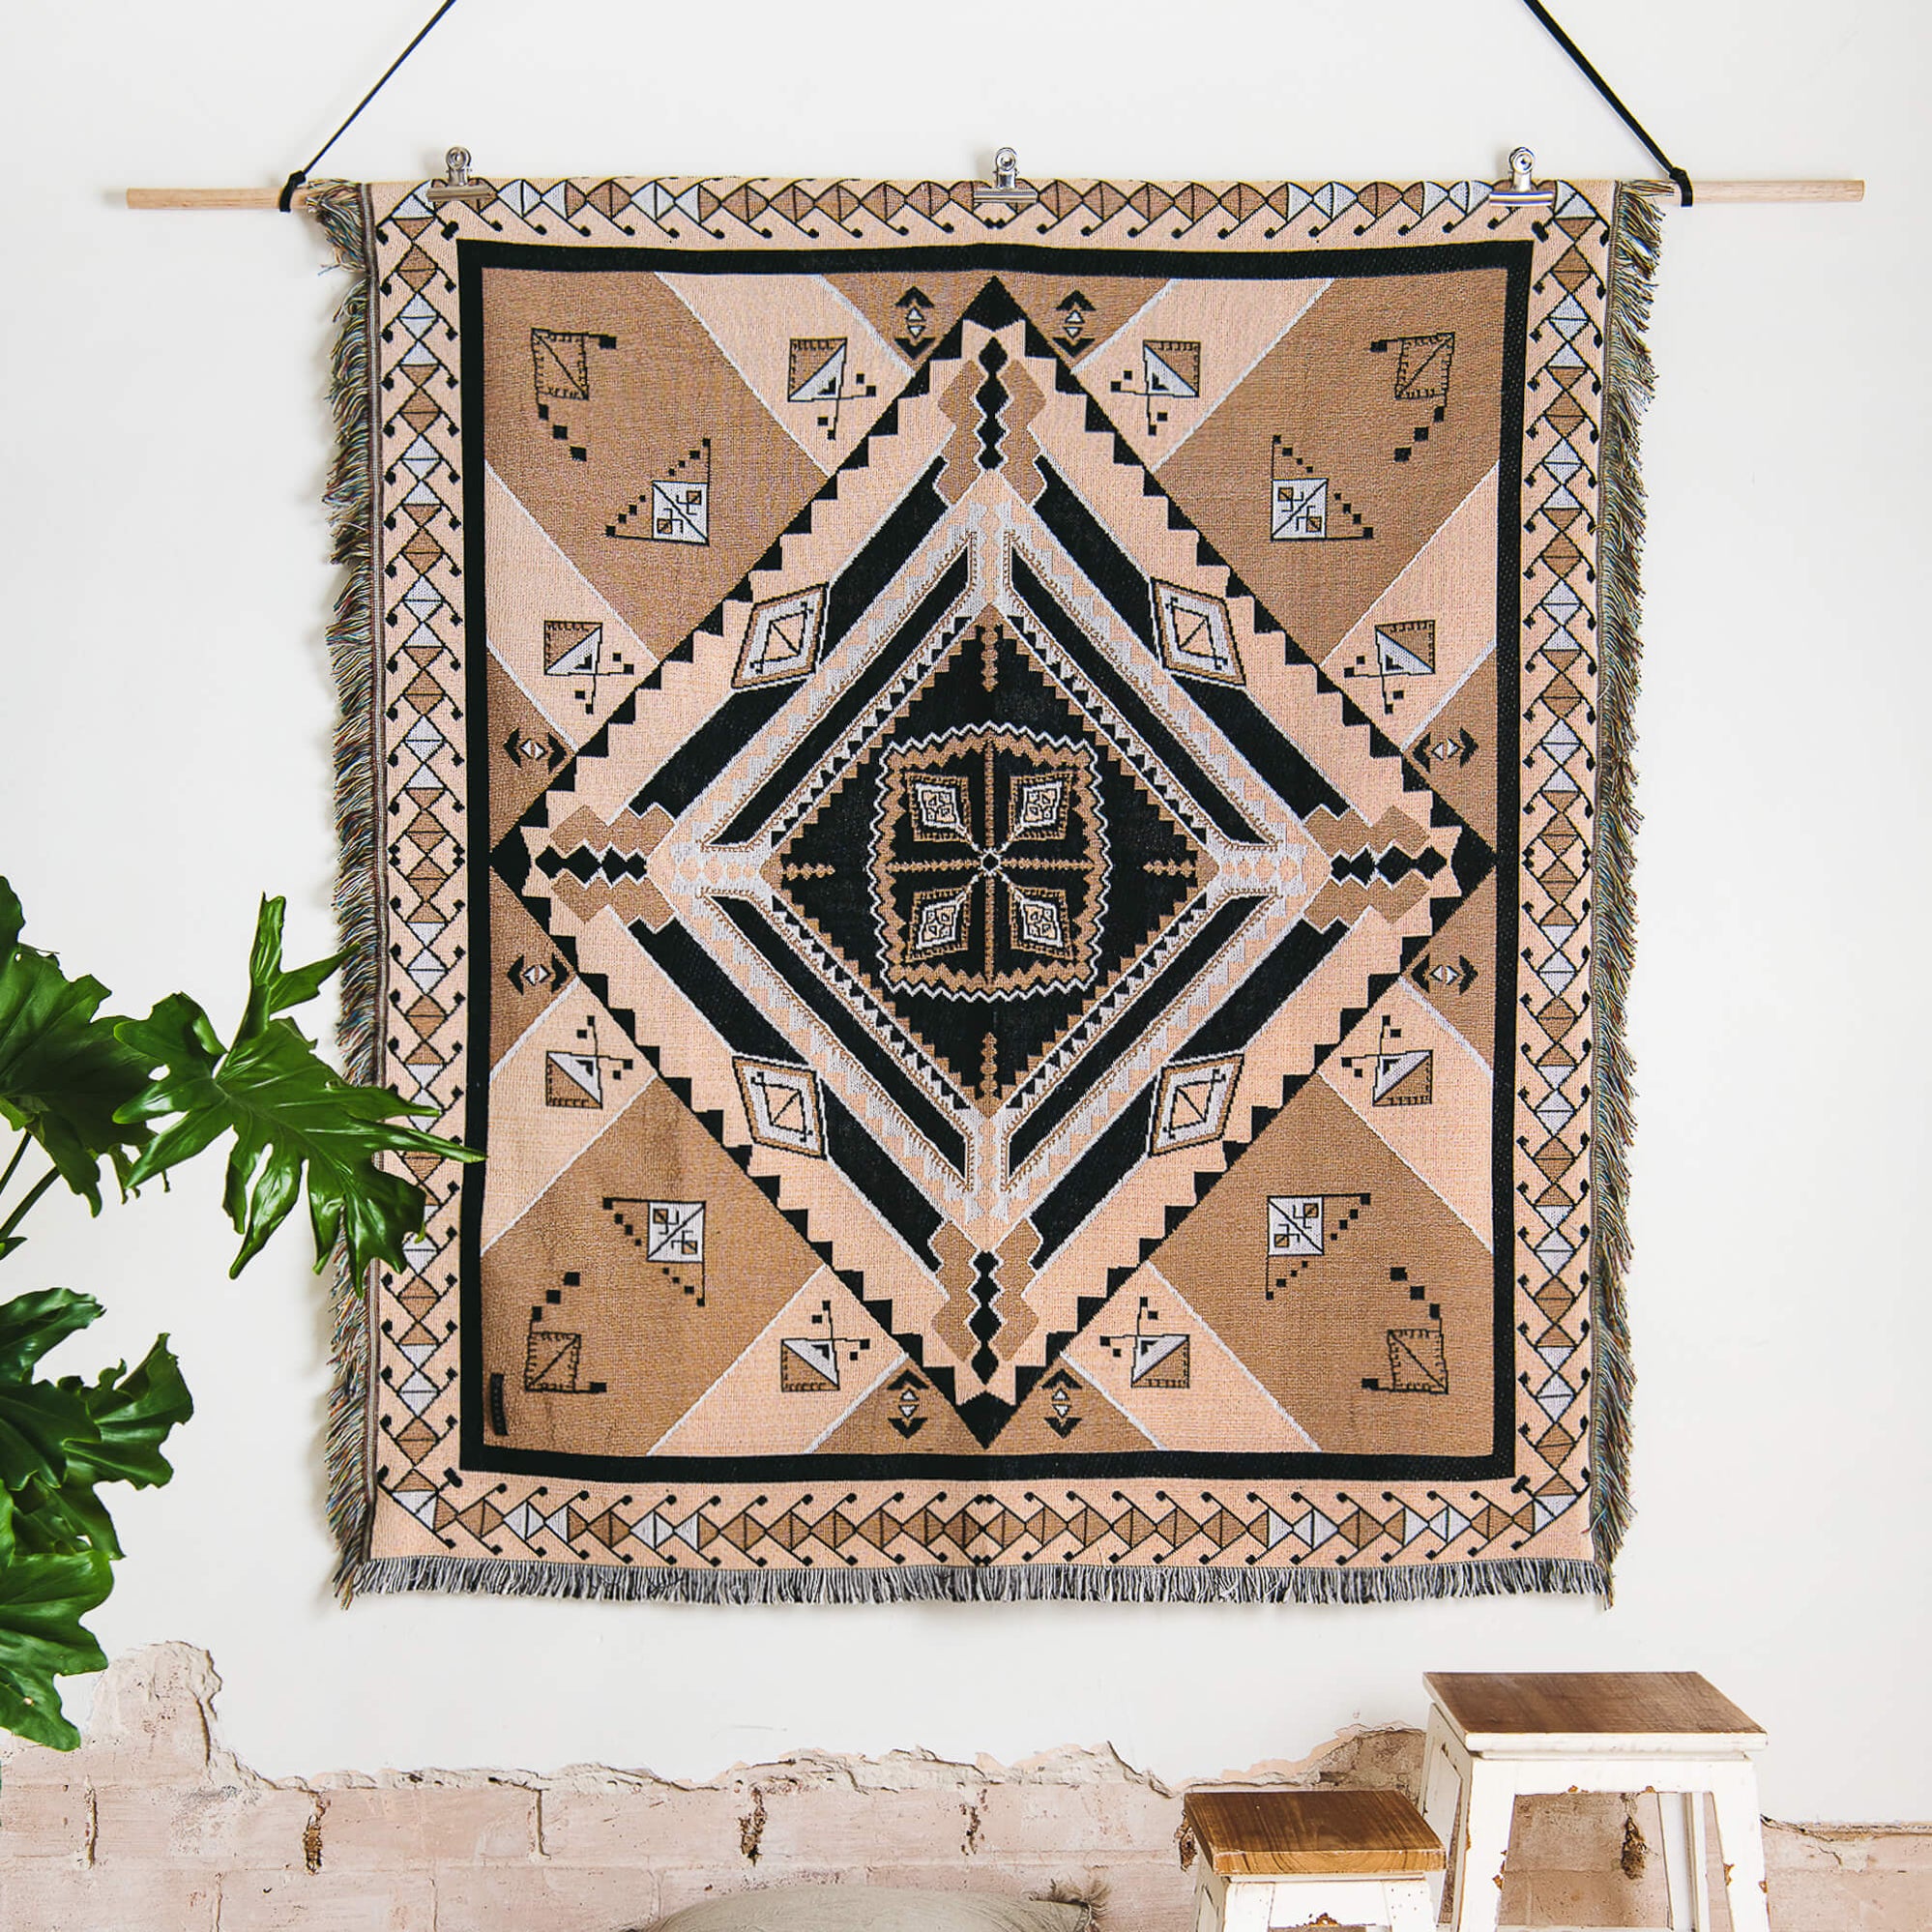 Buy Stylish & Unique Boho Picnic Rugs and Accessories Online | Hendeer